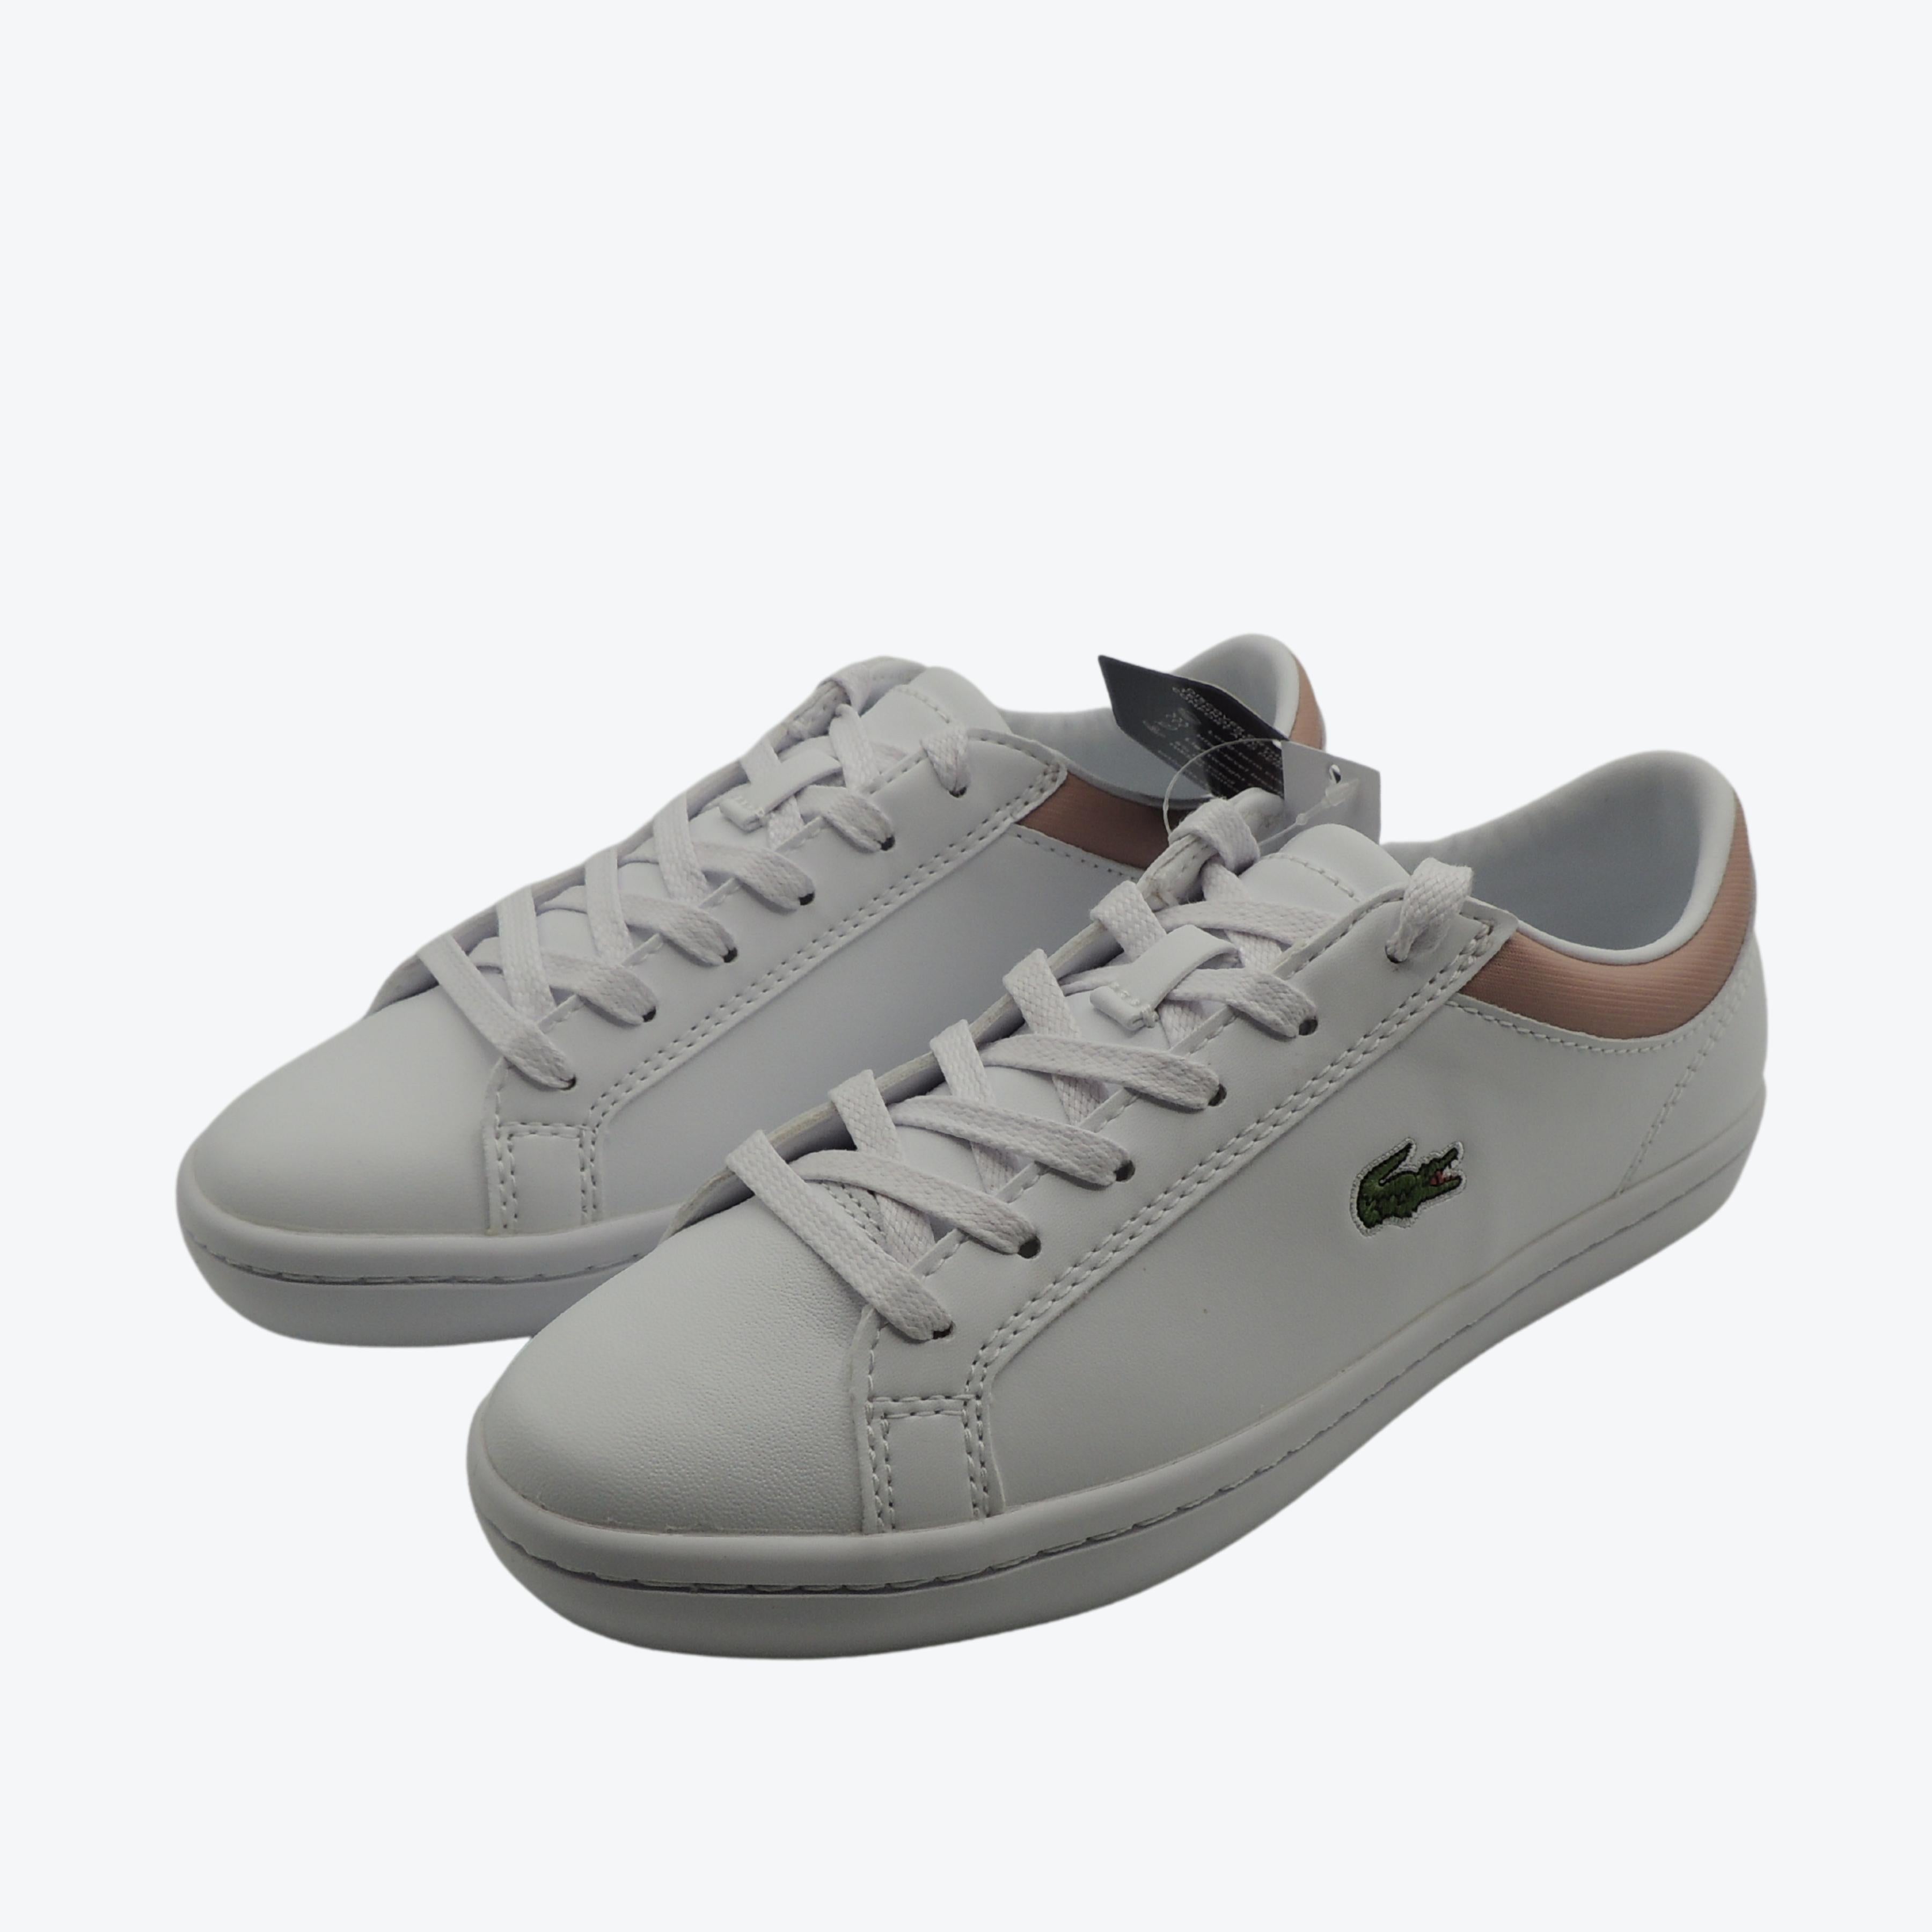 Lacoste Straightset Trainers in White/Pink